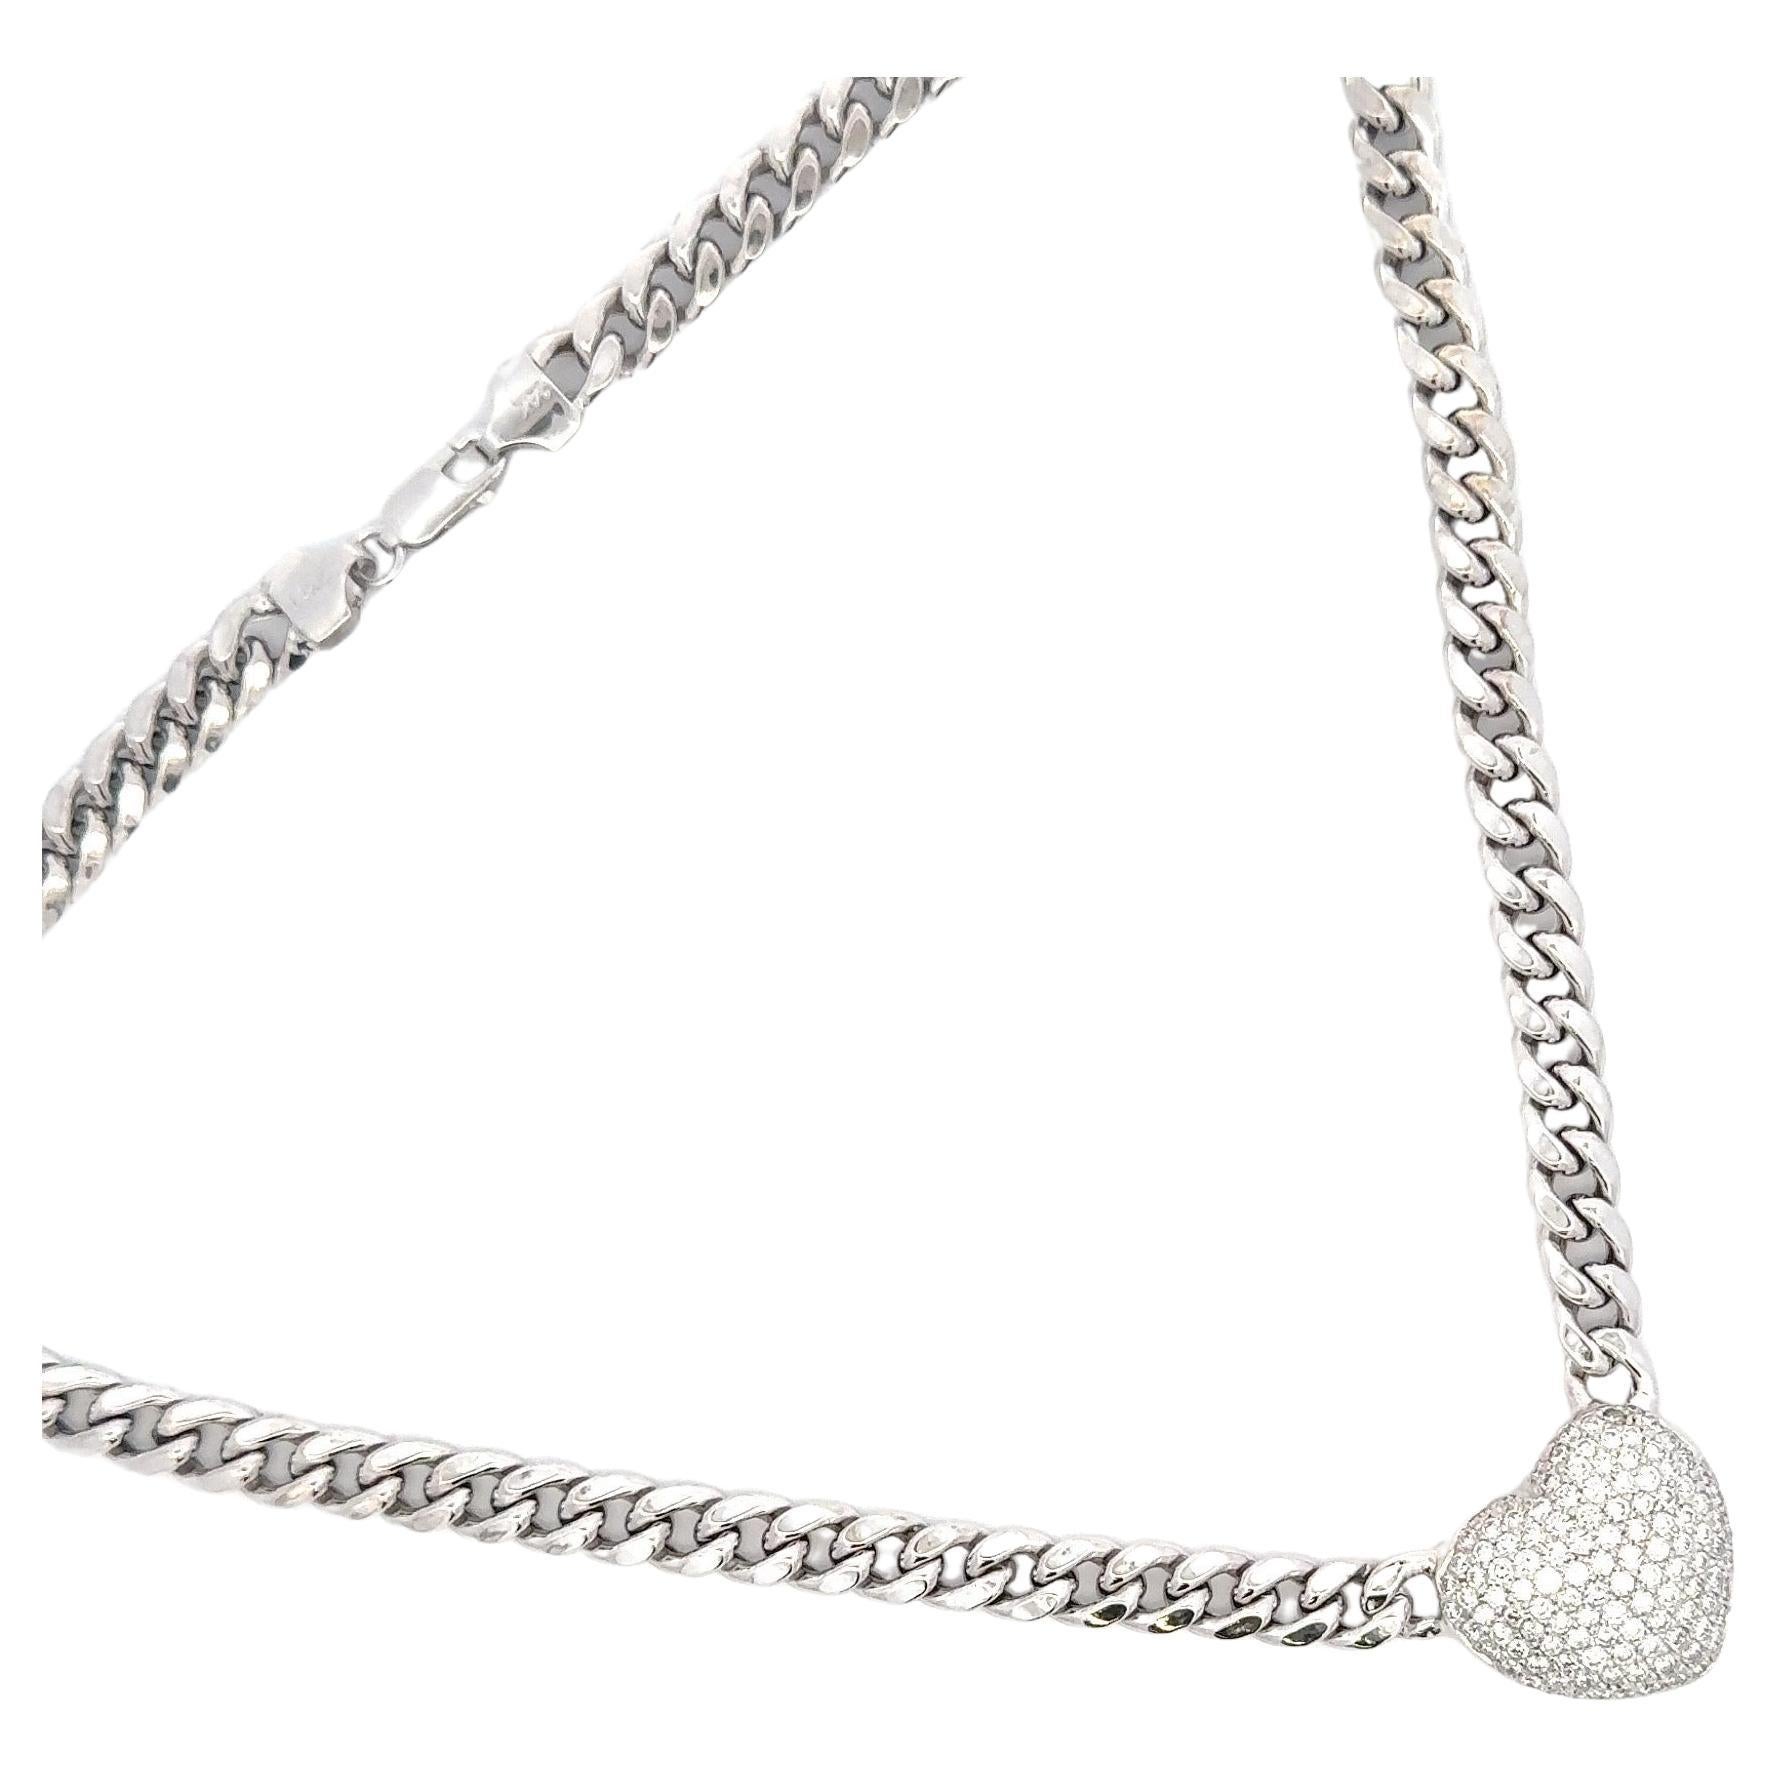 Round Cut Diamond Puffed Heart Pave on Cuban Chain 14 Karat White Gold 2.30 CTS F-G VS1-2 For Sale